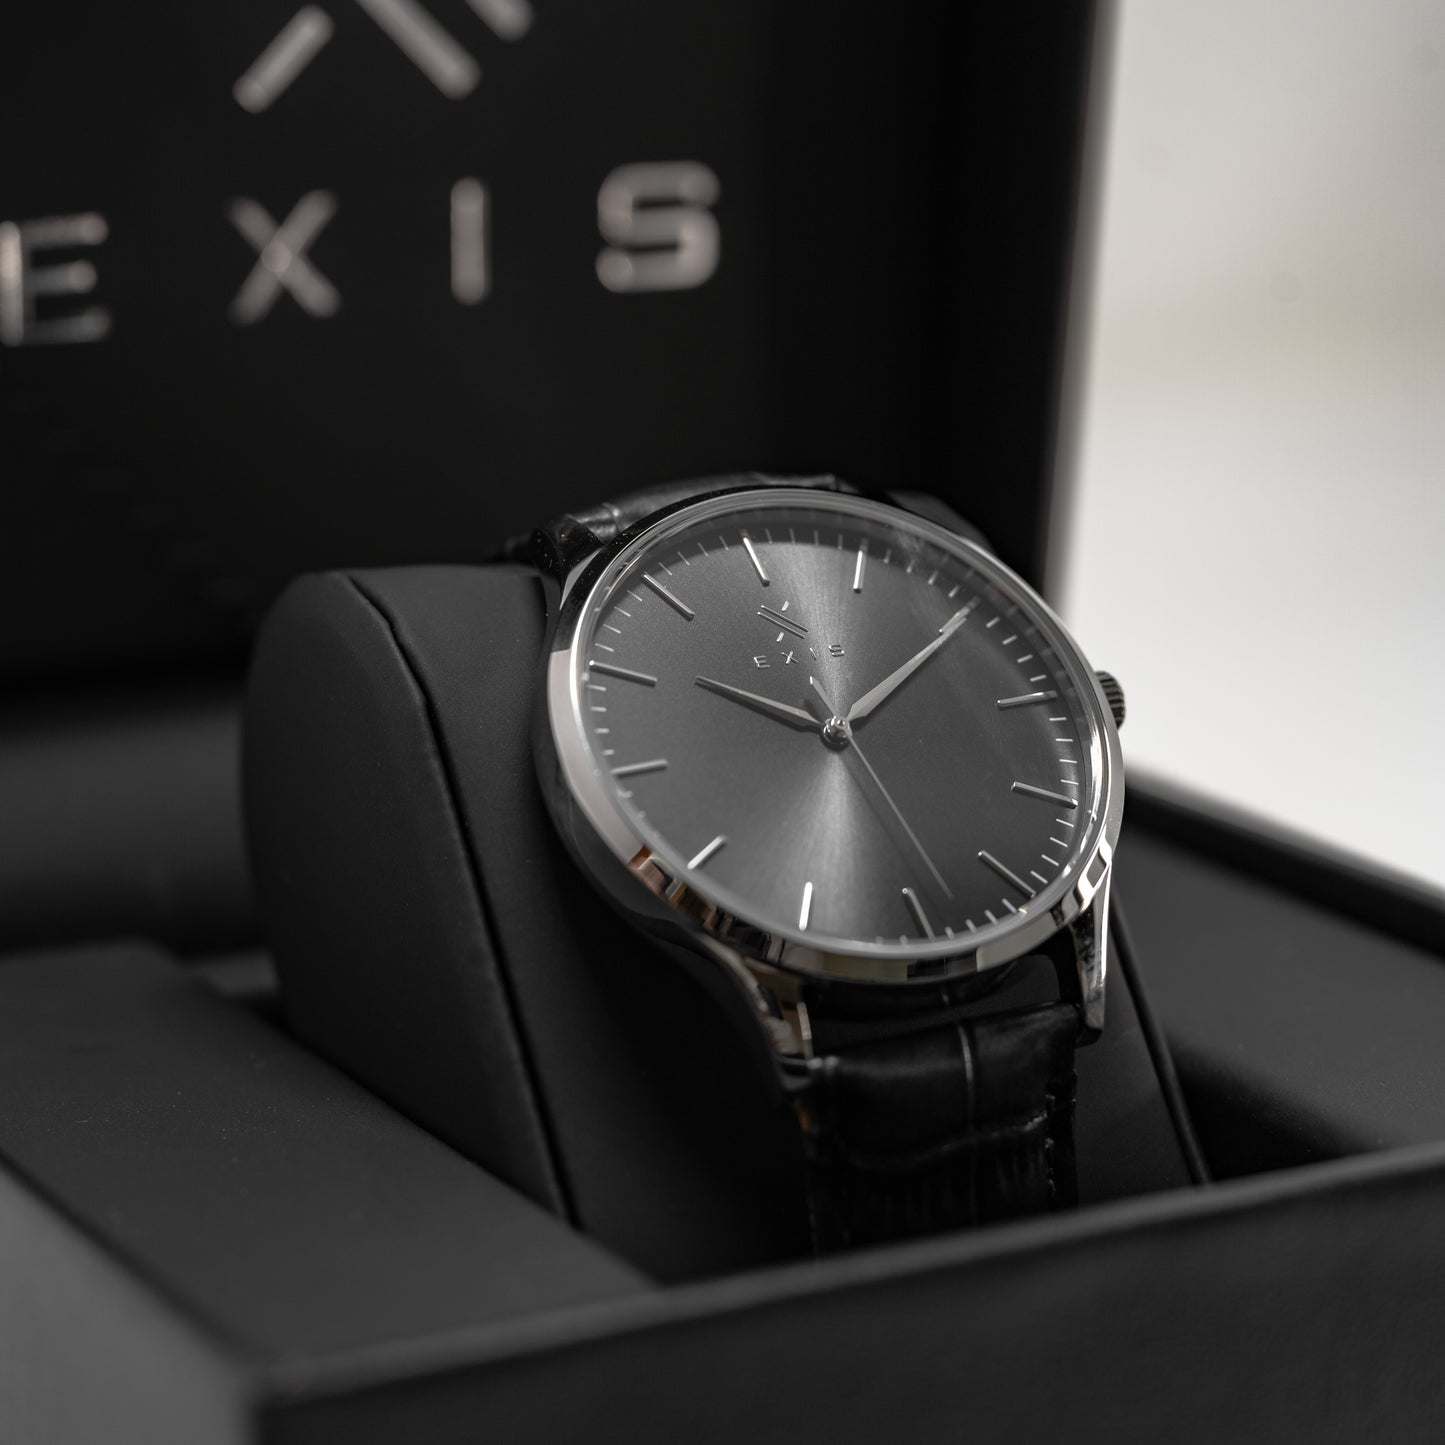 EMINENT BLACK - Exis watches